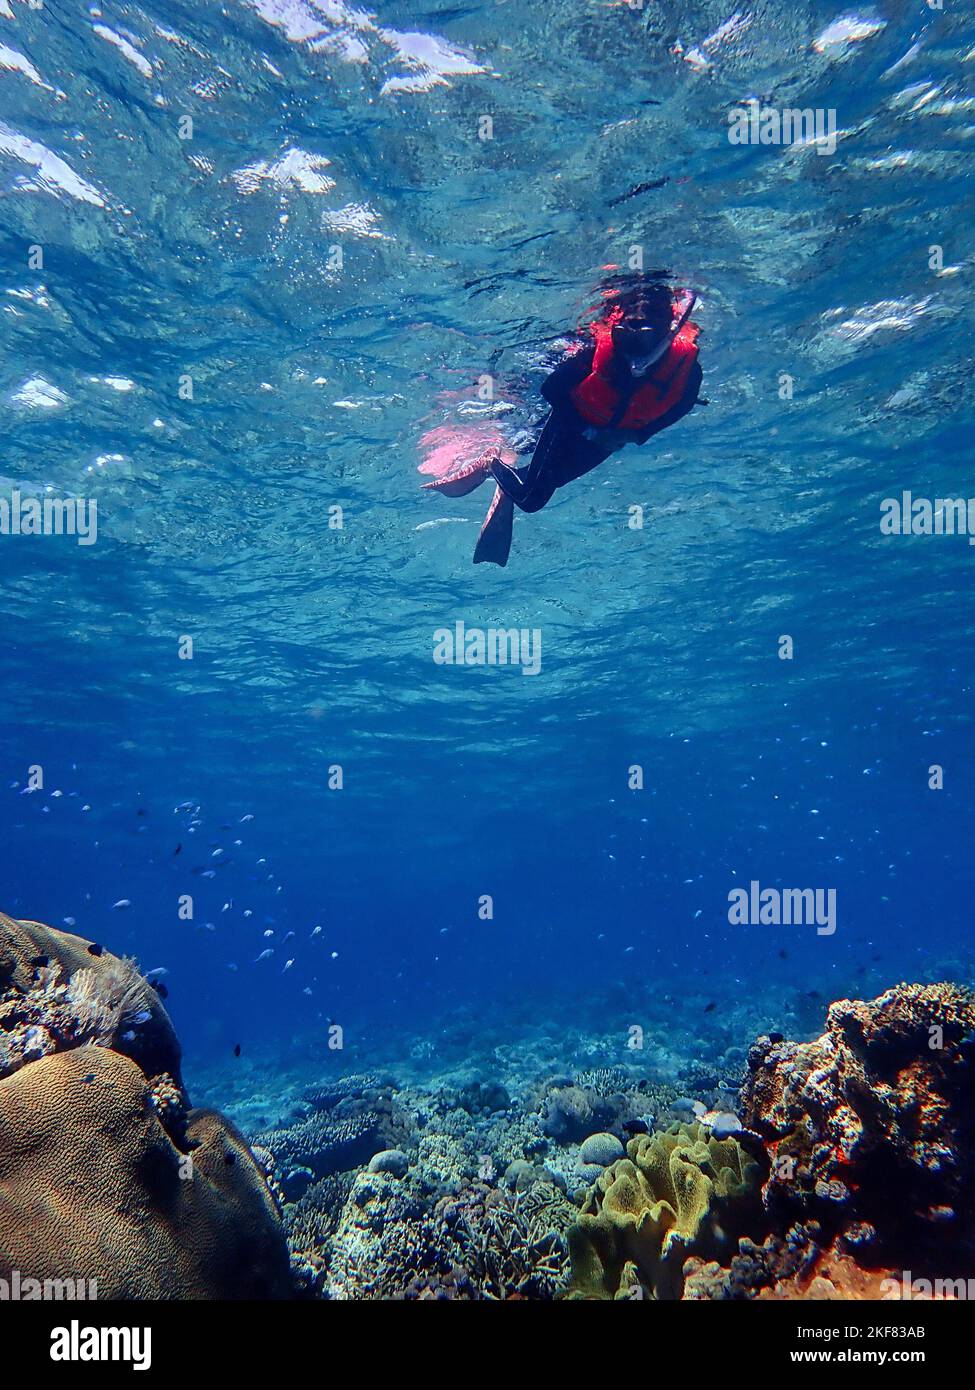 Indonesia Alor Island - Marine life Woman snorkeling in coral reef Stock Photo